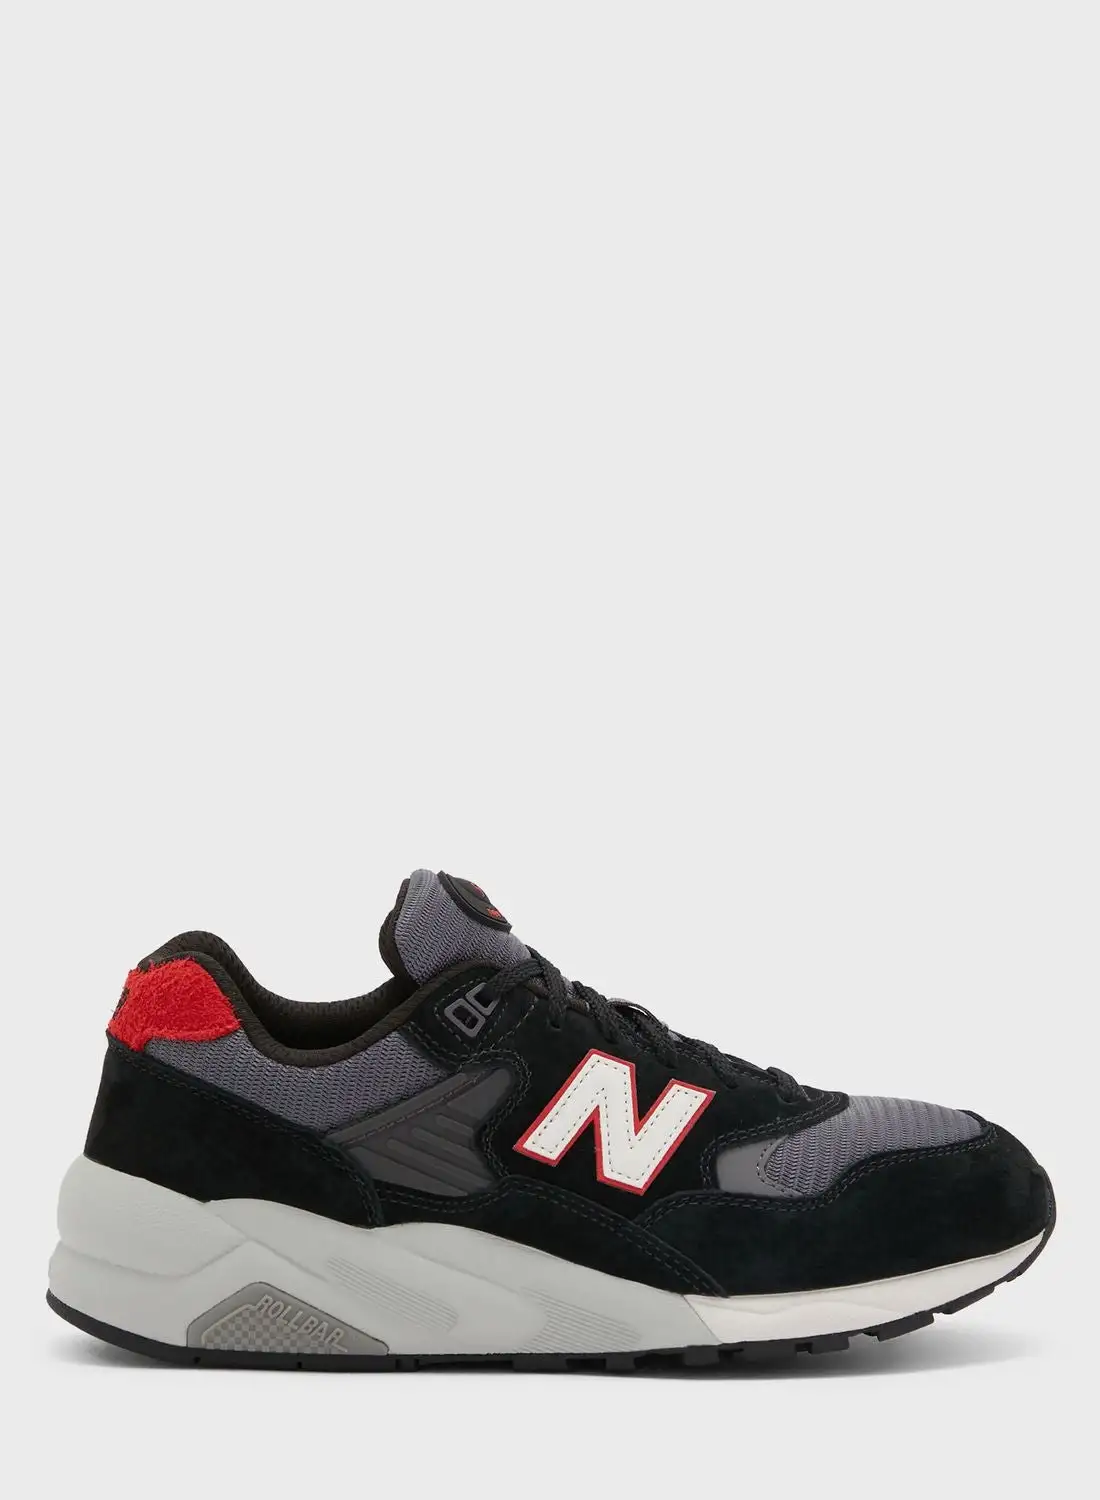 New Balance 580 Sneakers